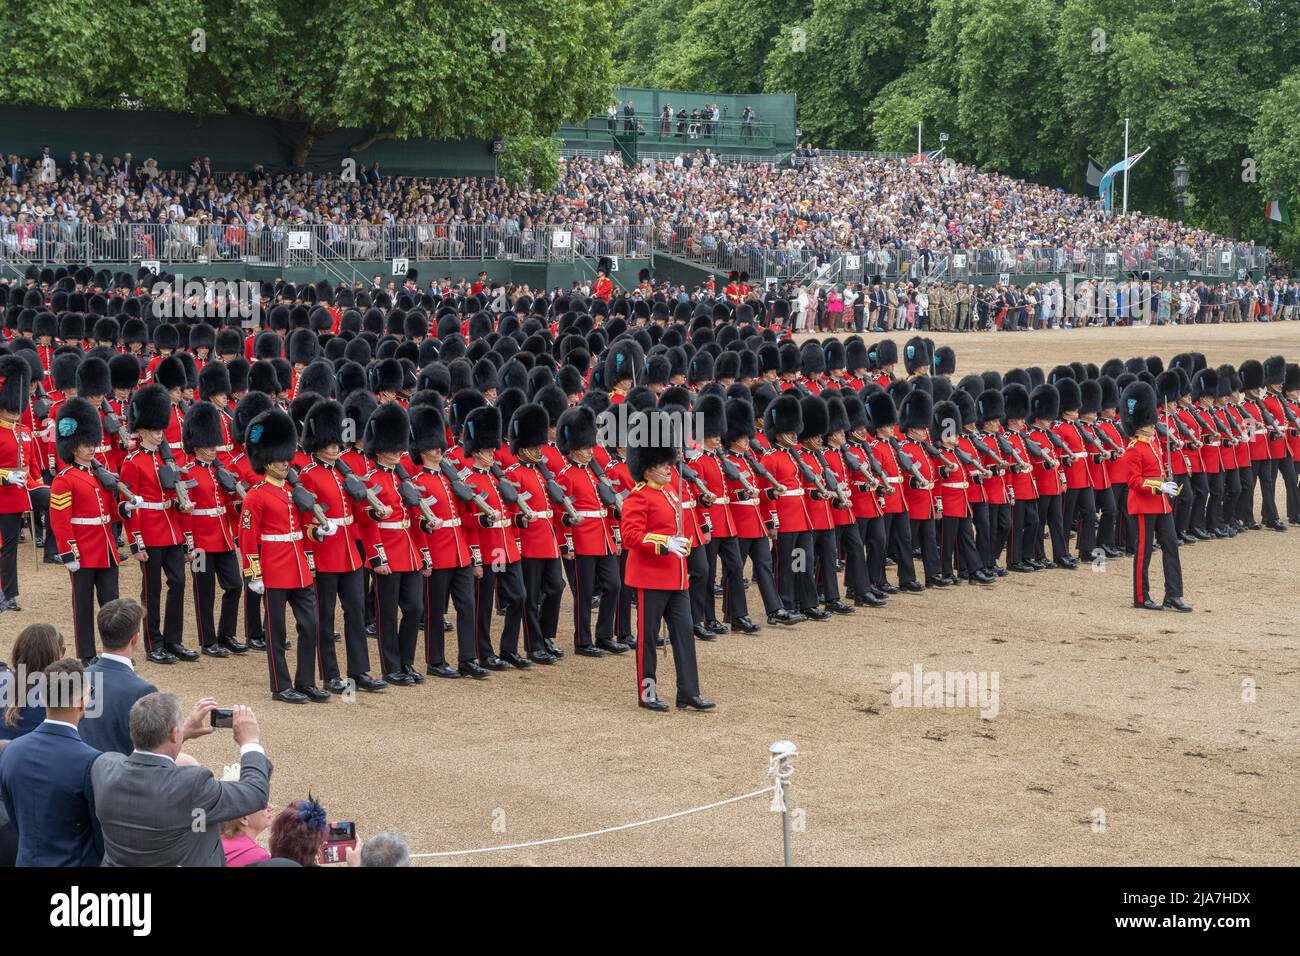 Horse Guards Parade, London, UK. 28 May 2022. The Colonel’s Review takes place, reviewed by HRH the Duke of Cambridge, and is the final rehearsal for Trooping the Colour which will take place on a weekday - Thursday 2nd June - for the Platinum Jubilee year. This year, the honour of trooping their colour falls to the Irish Guards and as Colonel of the regiment the Duke leads the final review. Credit: Malcolm Park/Alamy Live News Stock Photo